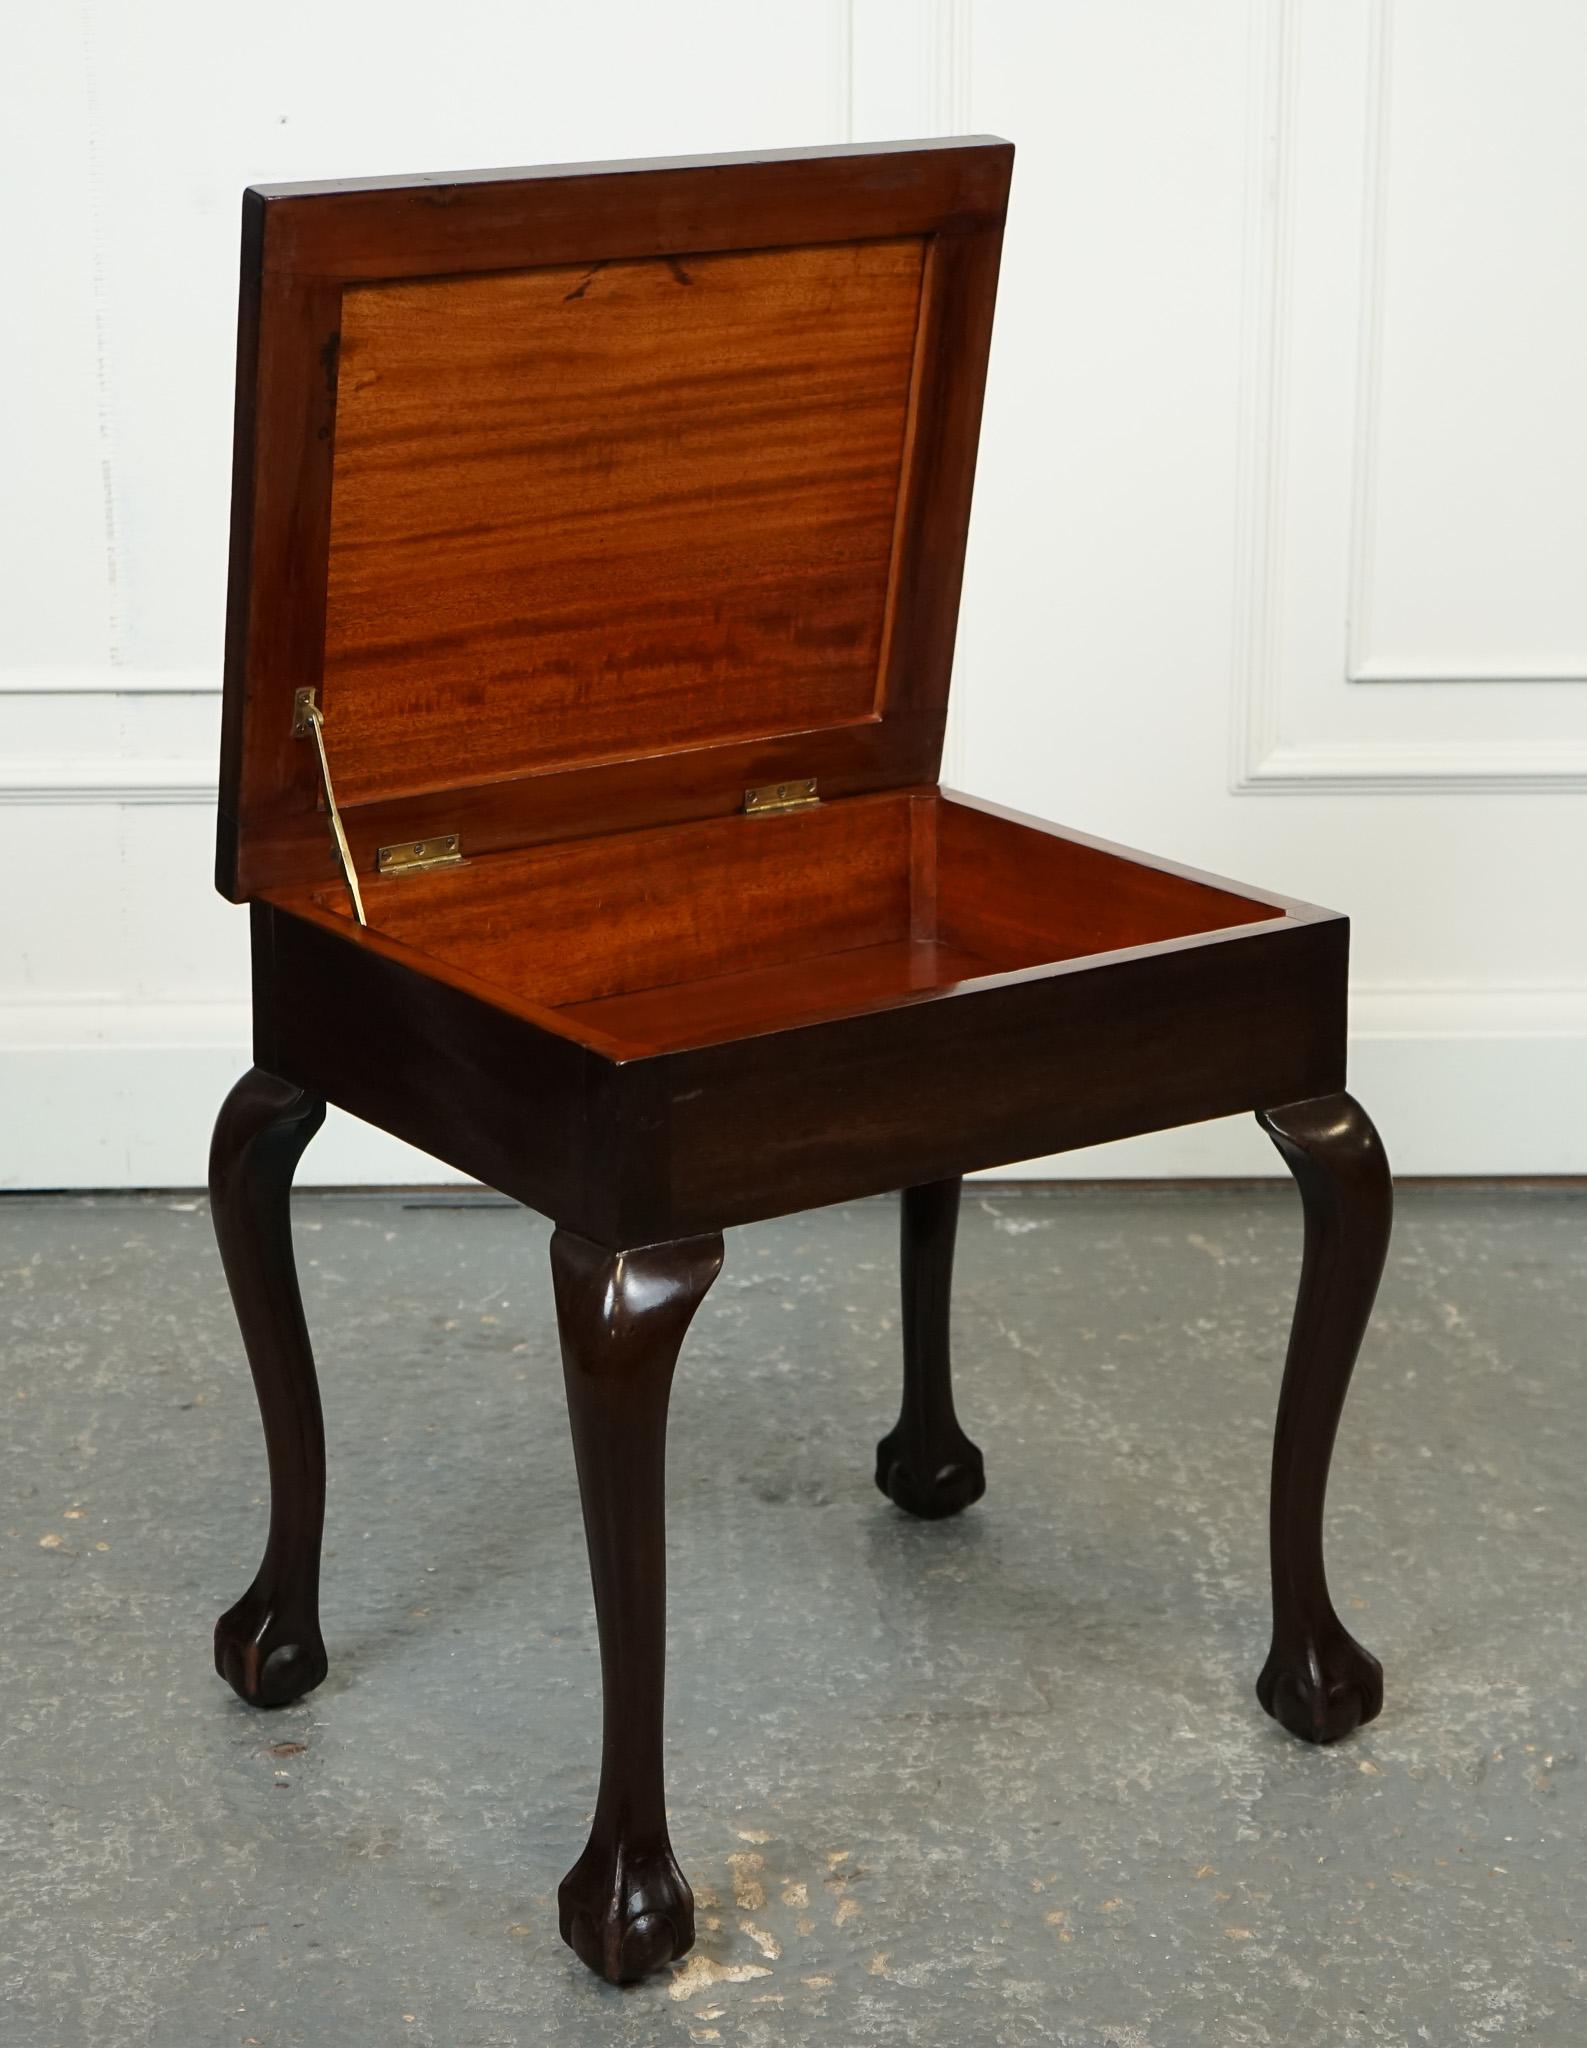 

We are delighted to offer for sale this Lovely Laidler Robsons Stool.

A Laidler Robsons piano stool with storage on claw and ball feet is a classic and elegant piece of furniture typically designed to complement traditional or antique-style